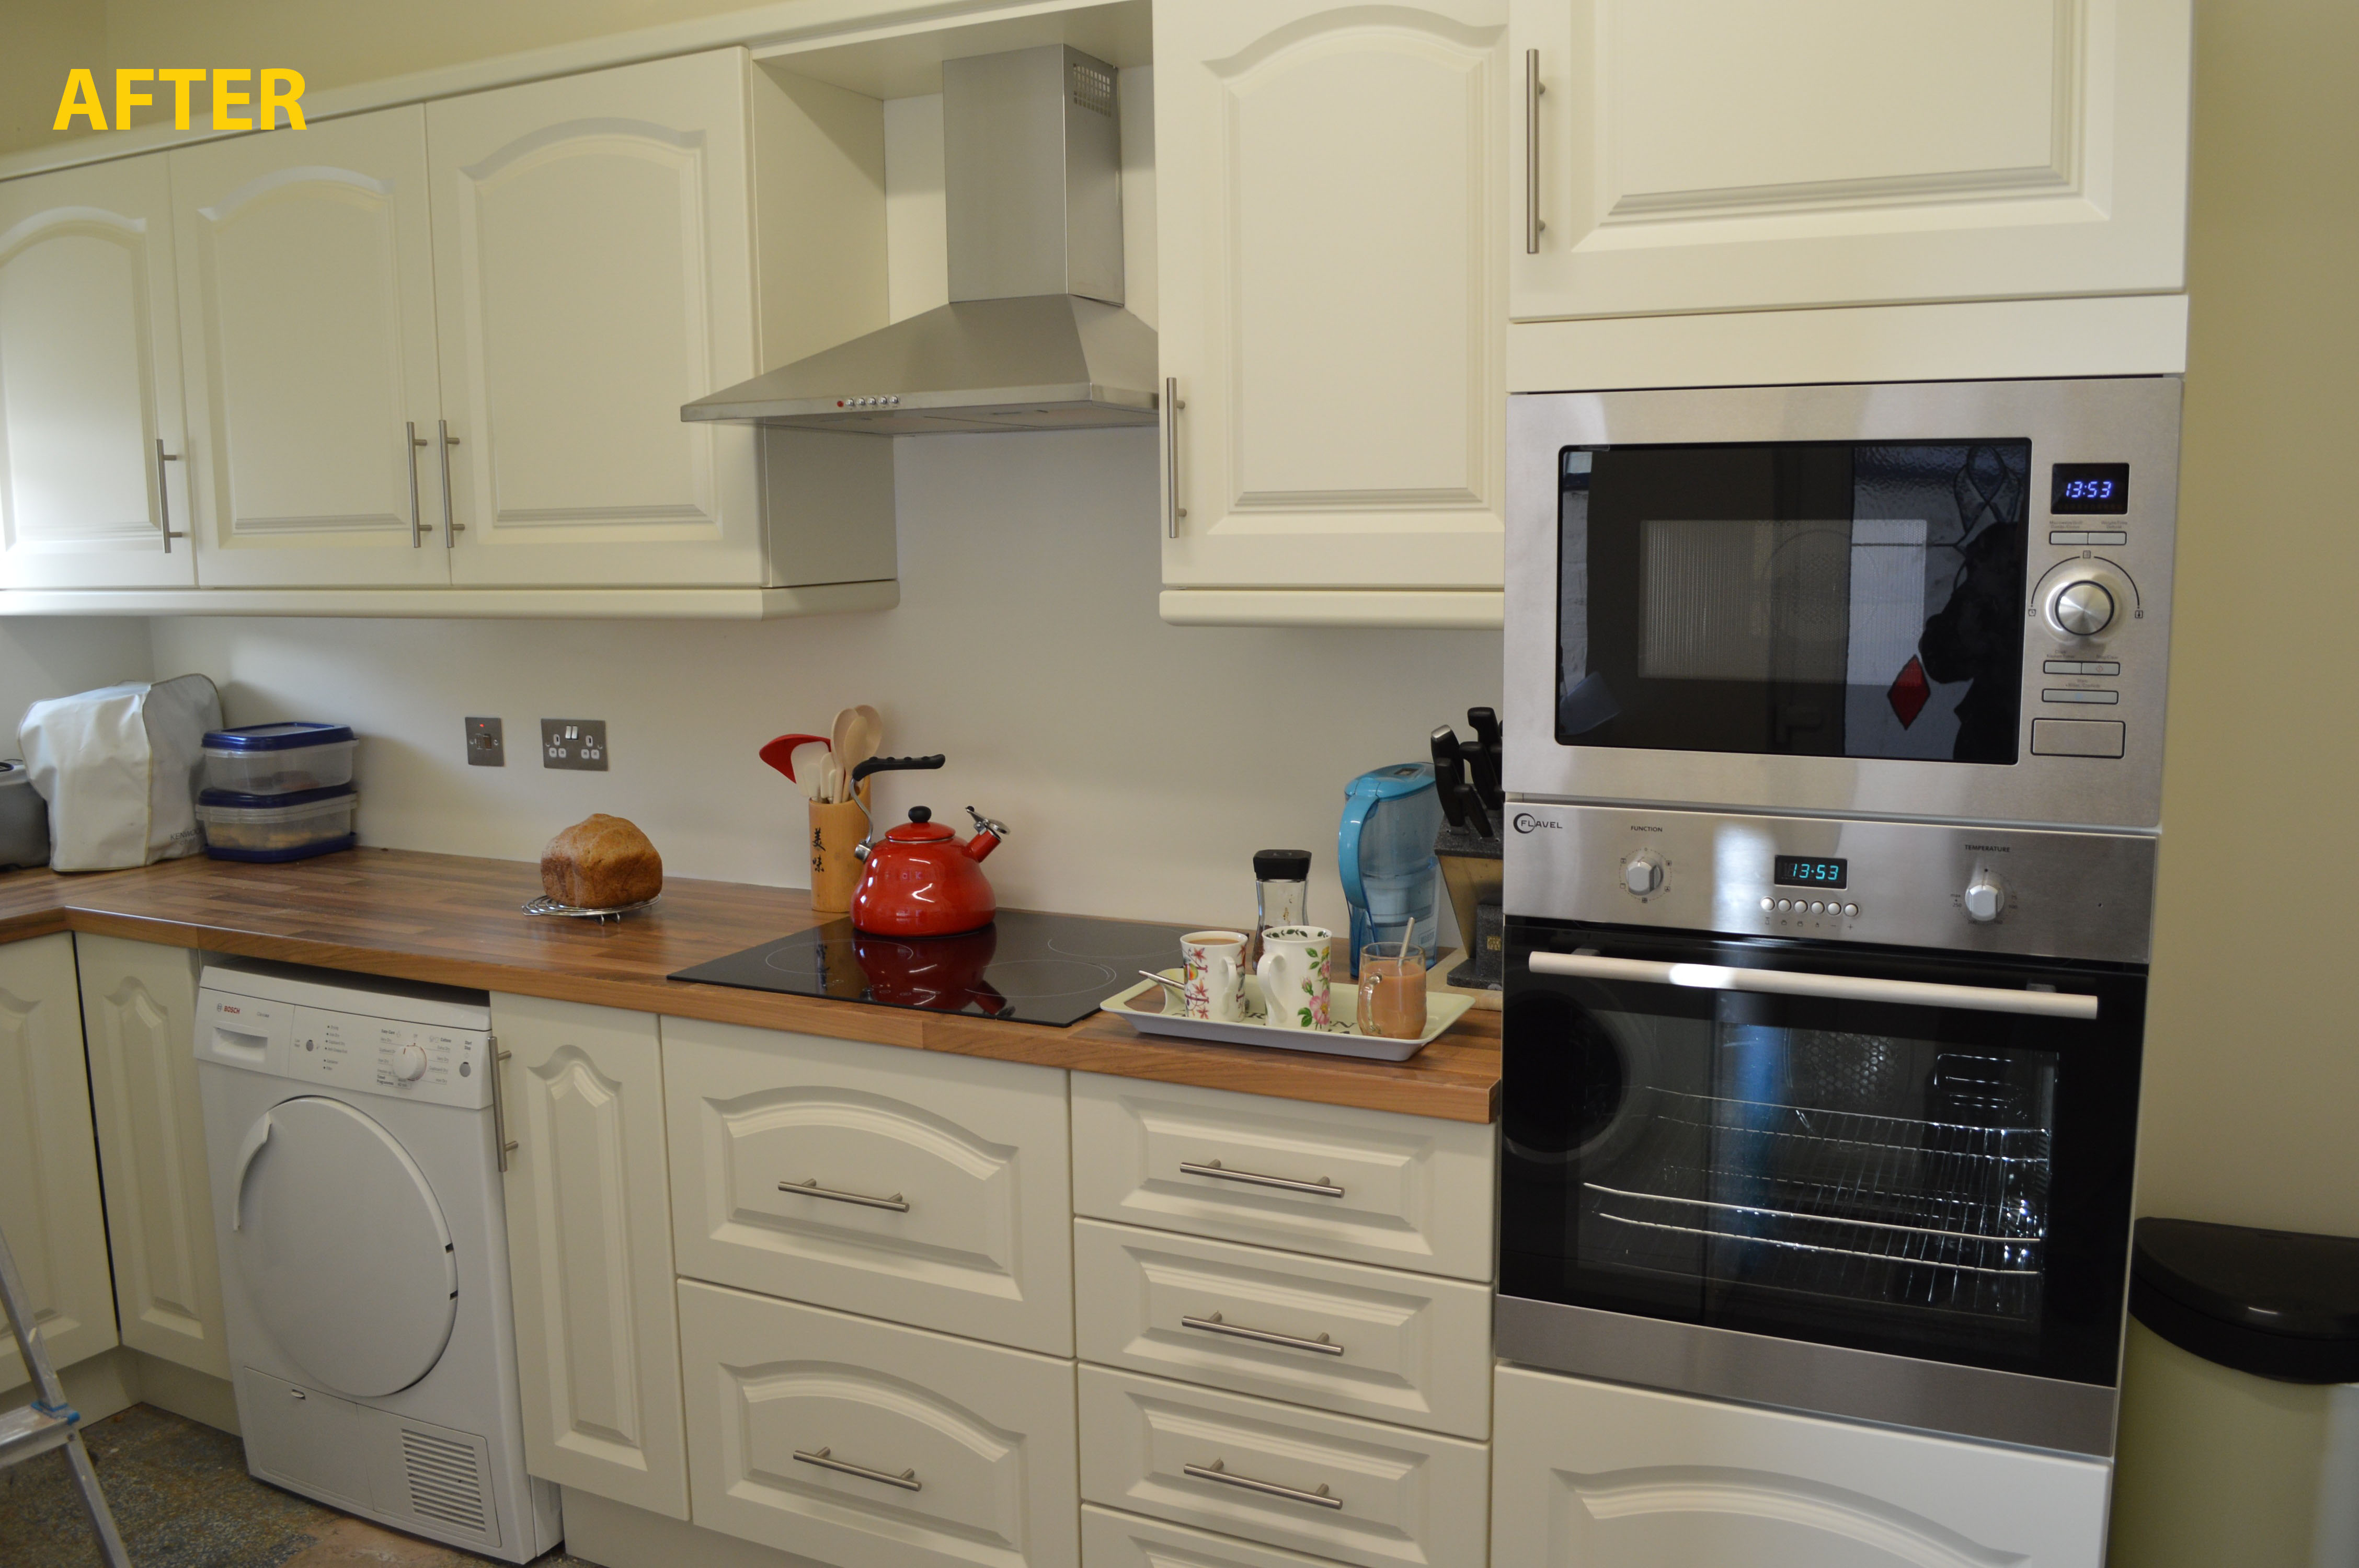 Kitchen in Crewe after a KW makover.